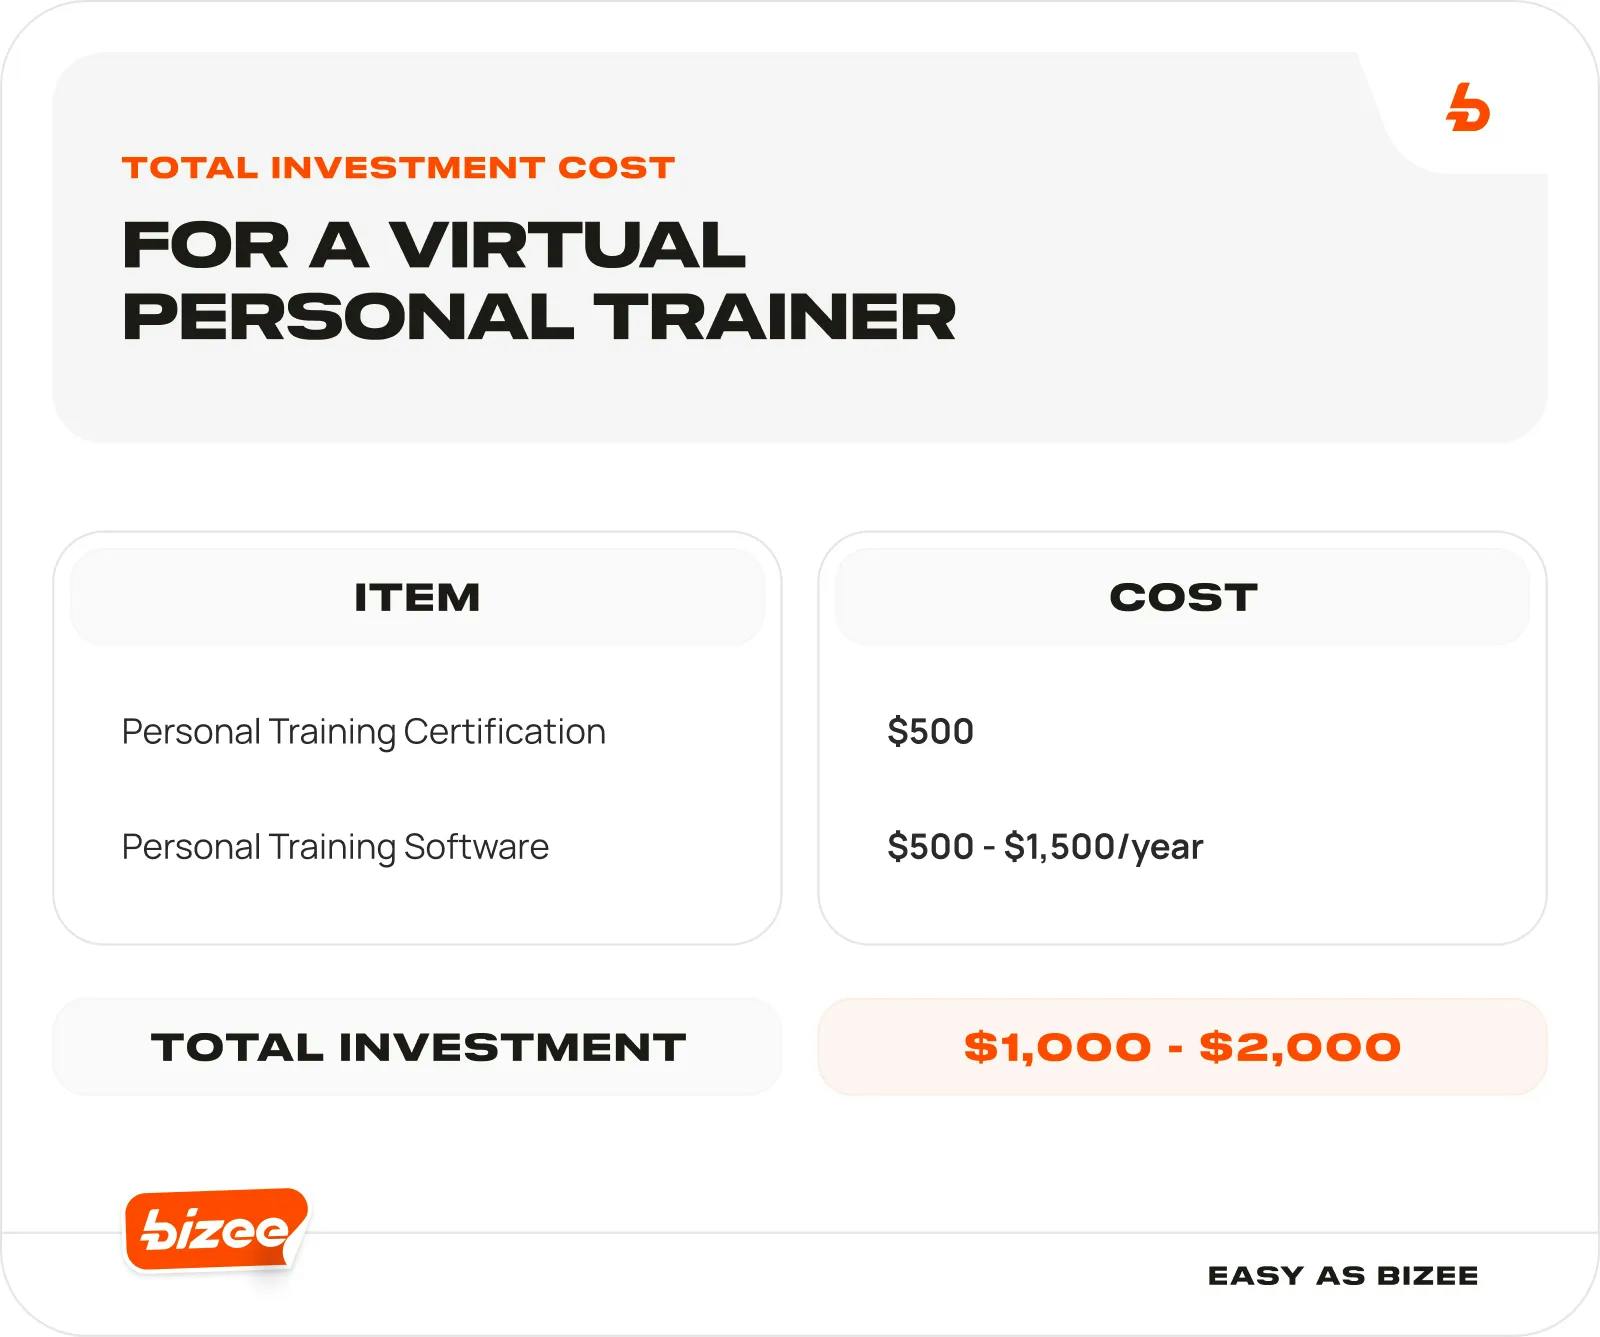 Total investment cost for a virtual personal trainer, certification $500, software $500-$1,500/year. Total: $1000-$2000